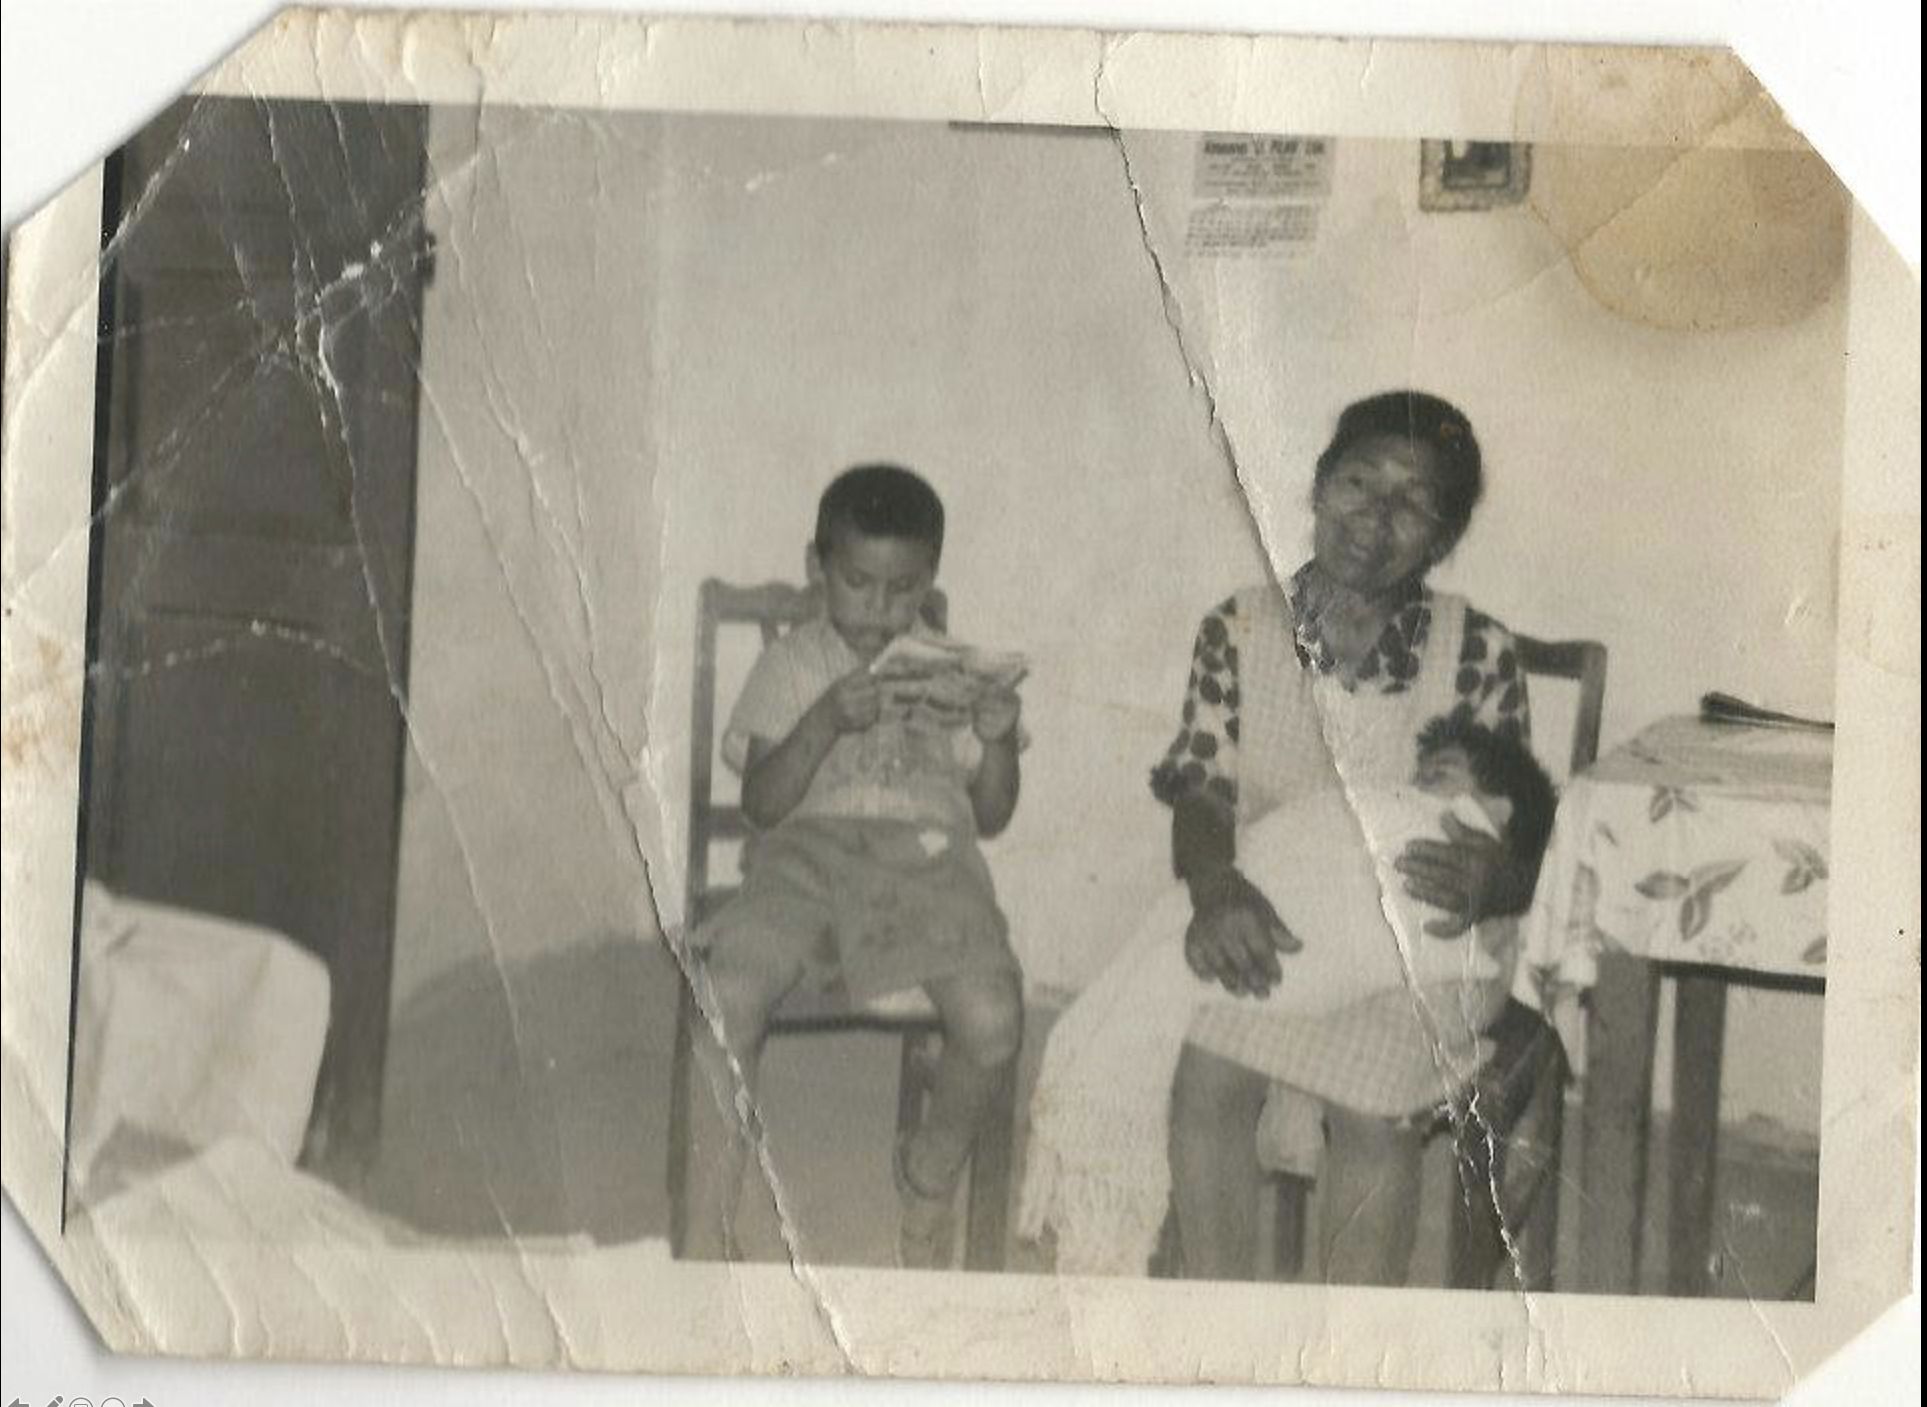 7-year-old Alfredo sitting on a chair, reading. Next to him is his his great-aunt holding her grandchild.